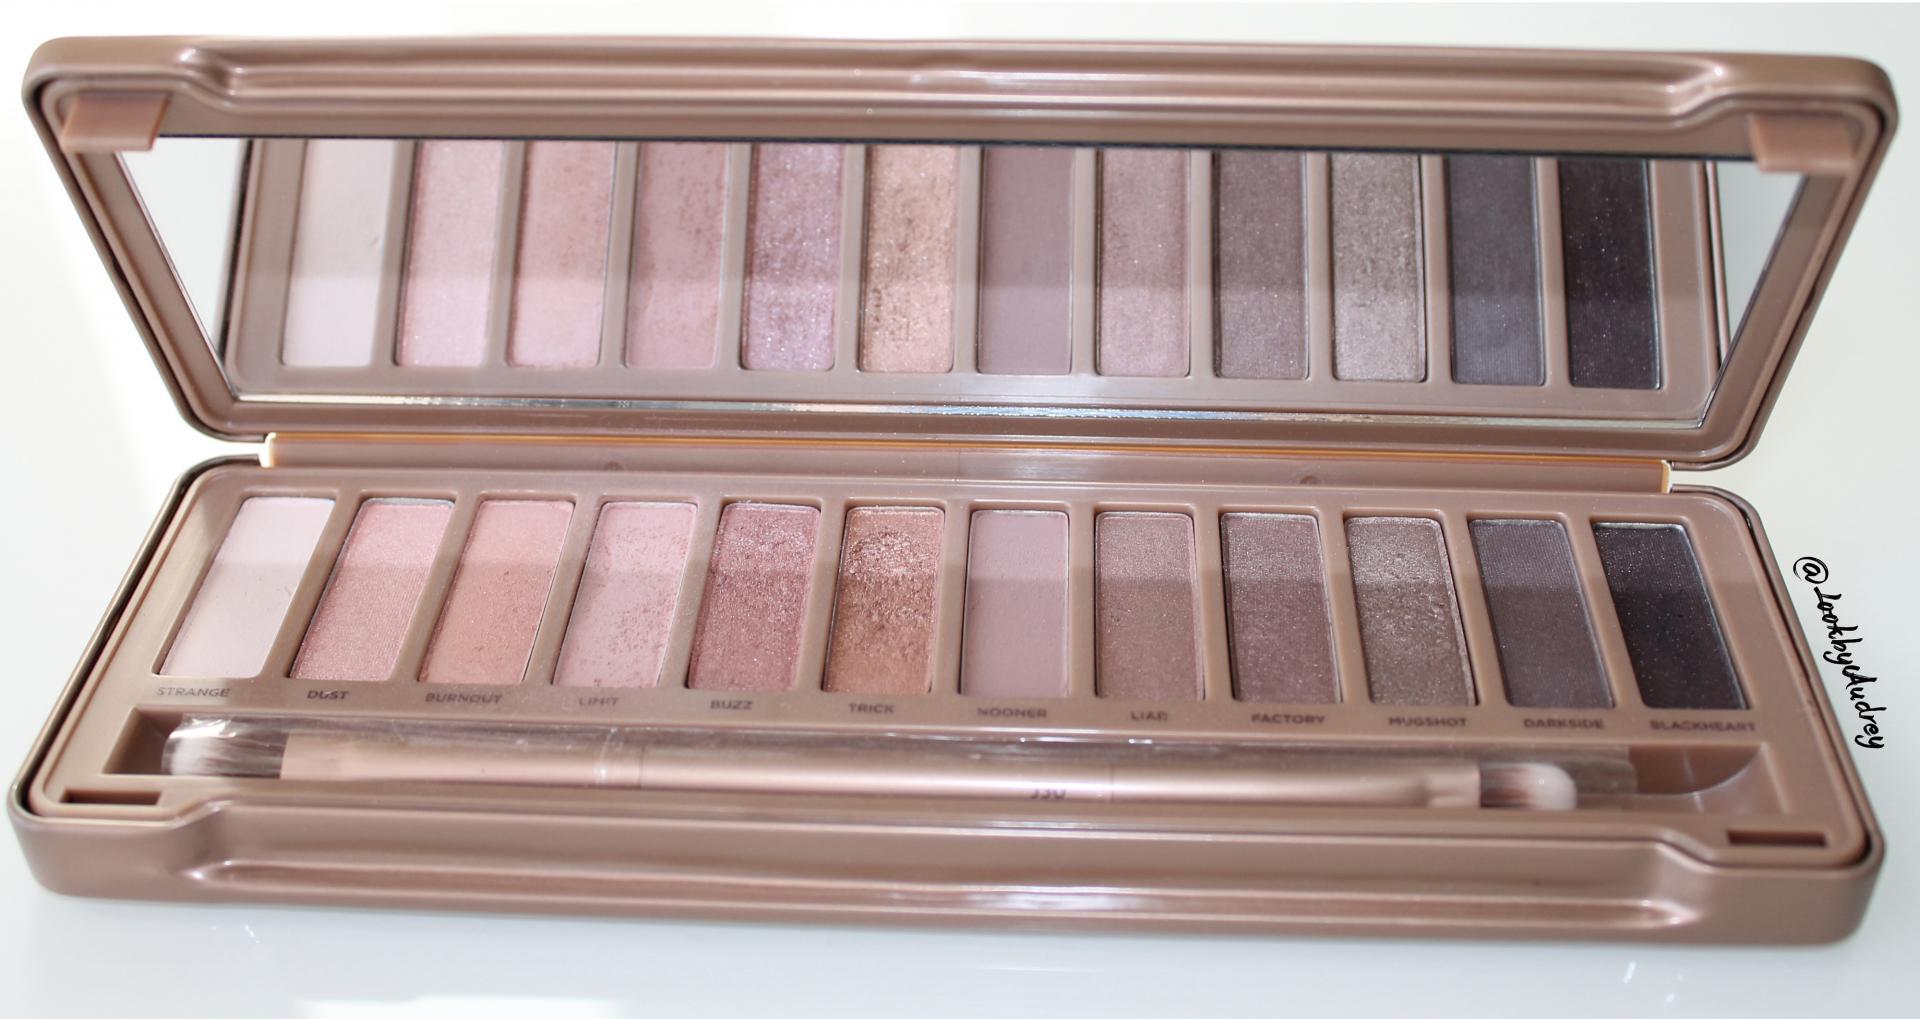 Palette NAKED 3 / URBAN DECAY